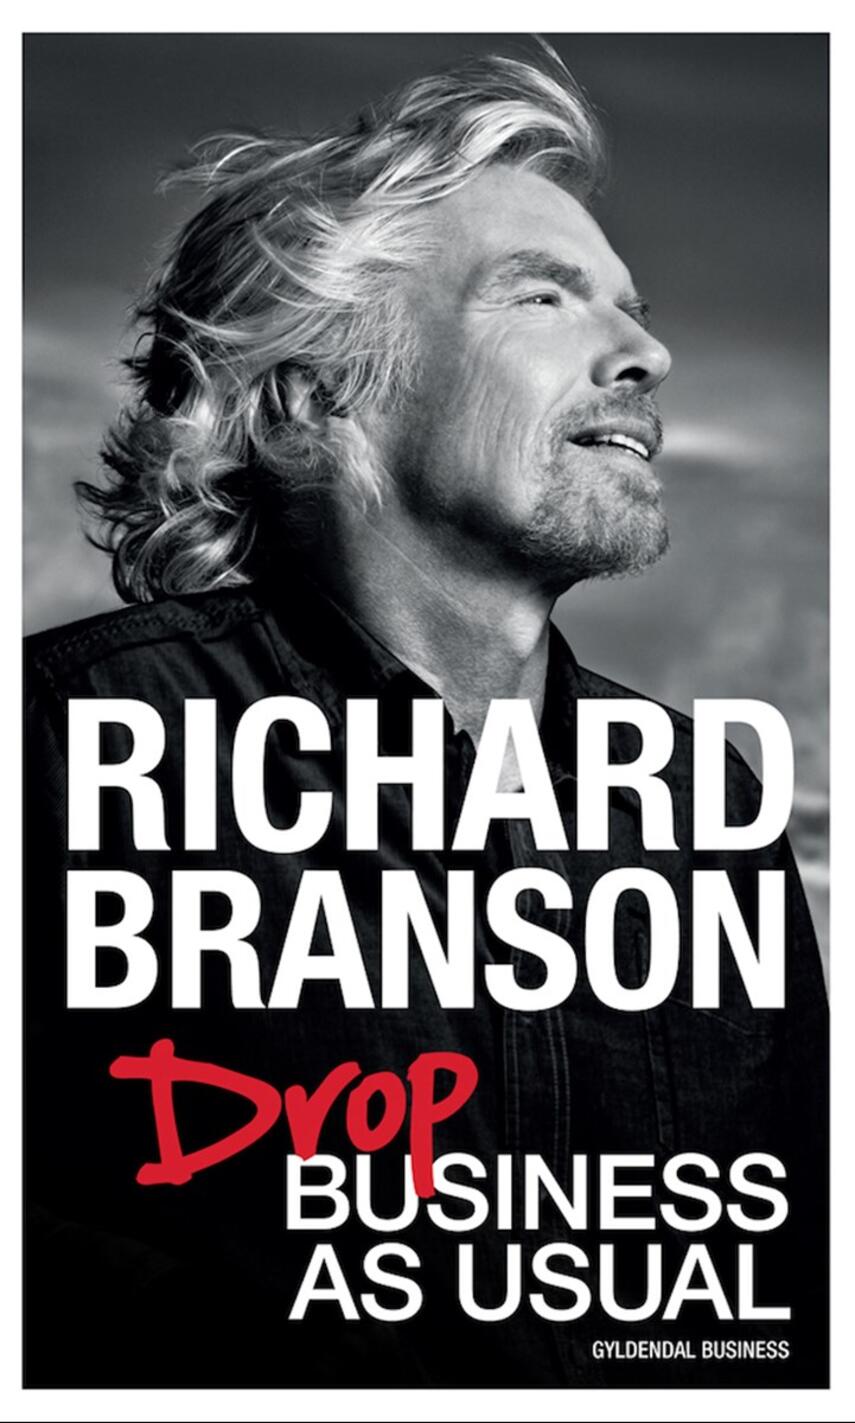 Richard Branson: Drop business as usual